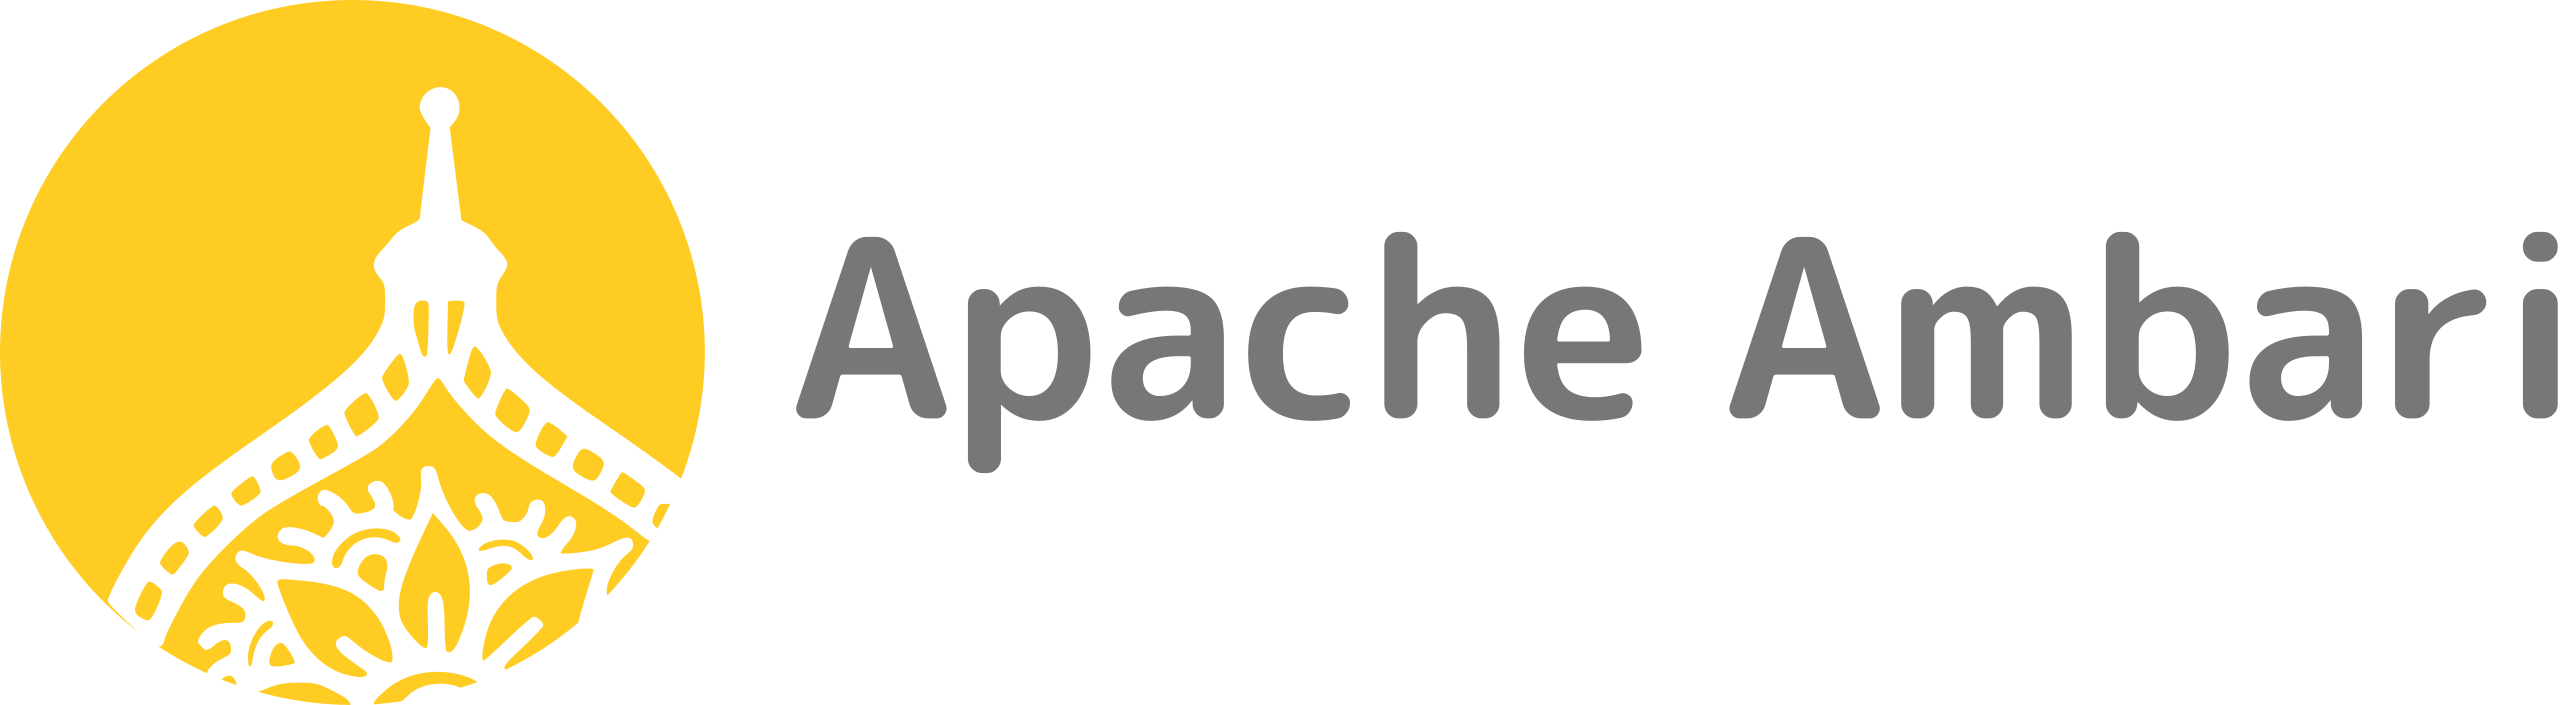 Apache ambari is a component of the Apache Hadoop ecosystem, specifically designed for managing and monitoring Hadoop clusters. It provides a user-friendly interface to streamline the administration tasks related to Apache